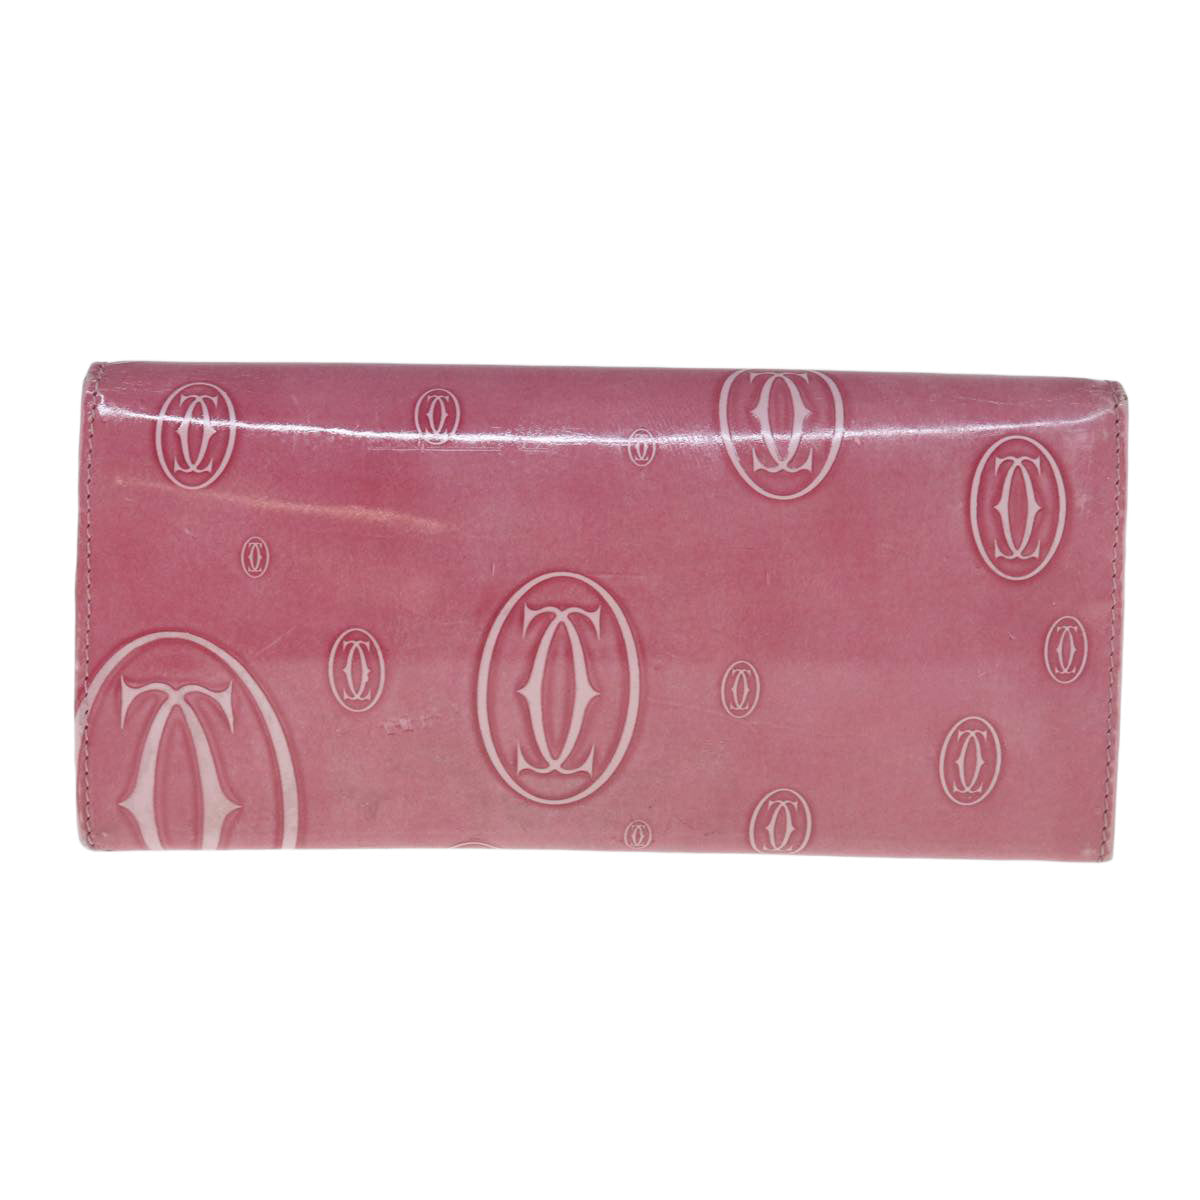 CARTIER Happy Birthday Wallet Patent leather Pink Auth am5559 - 0